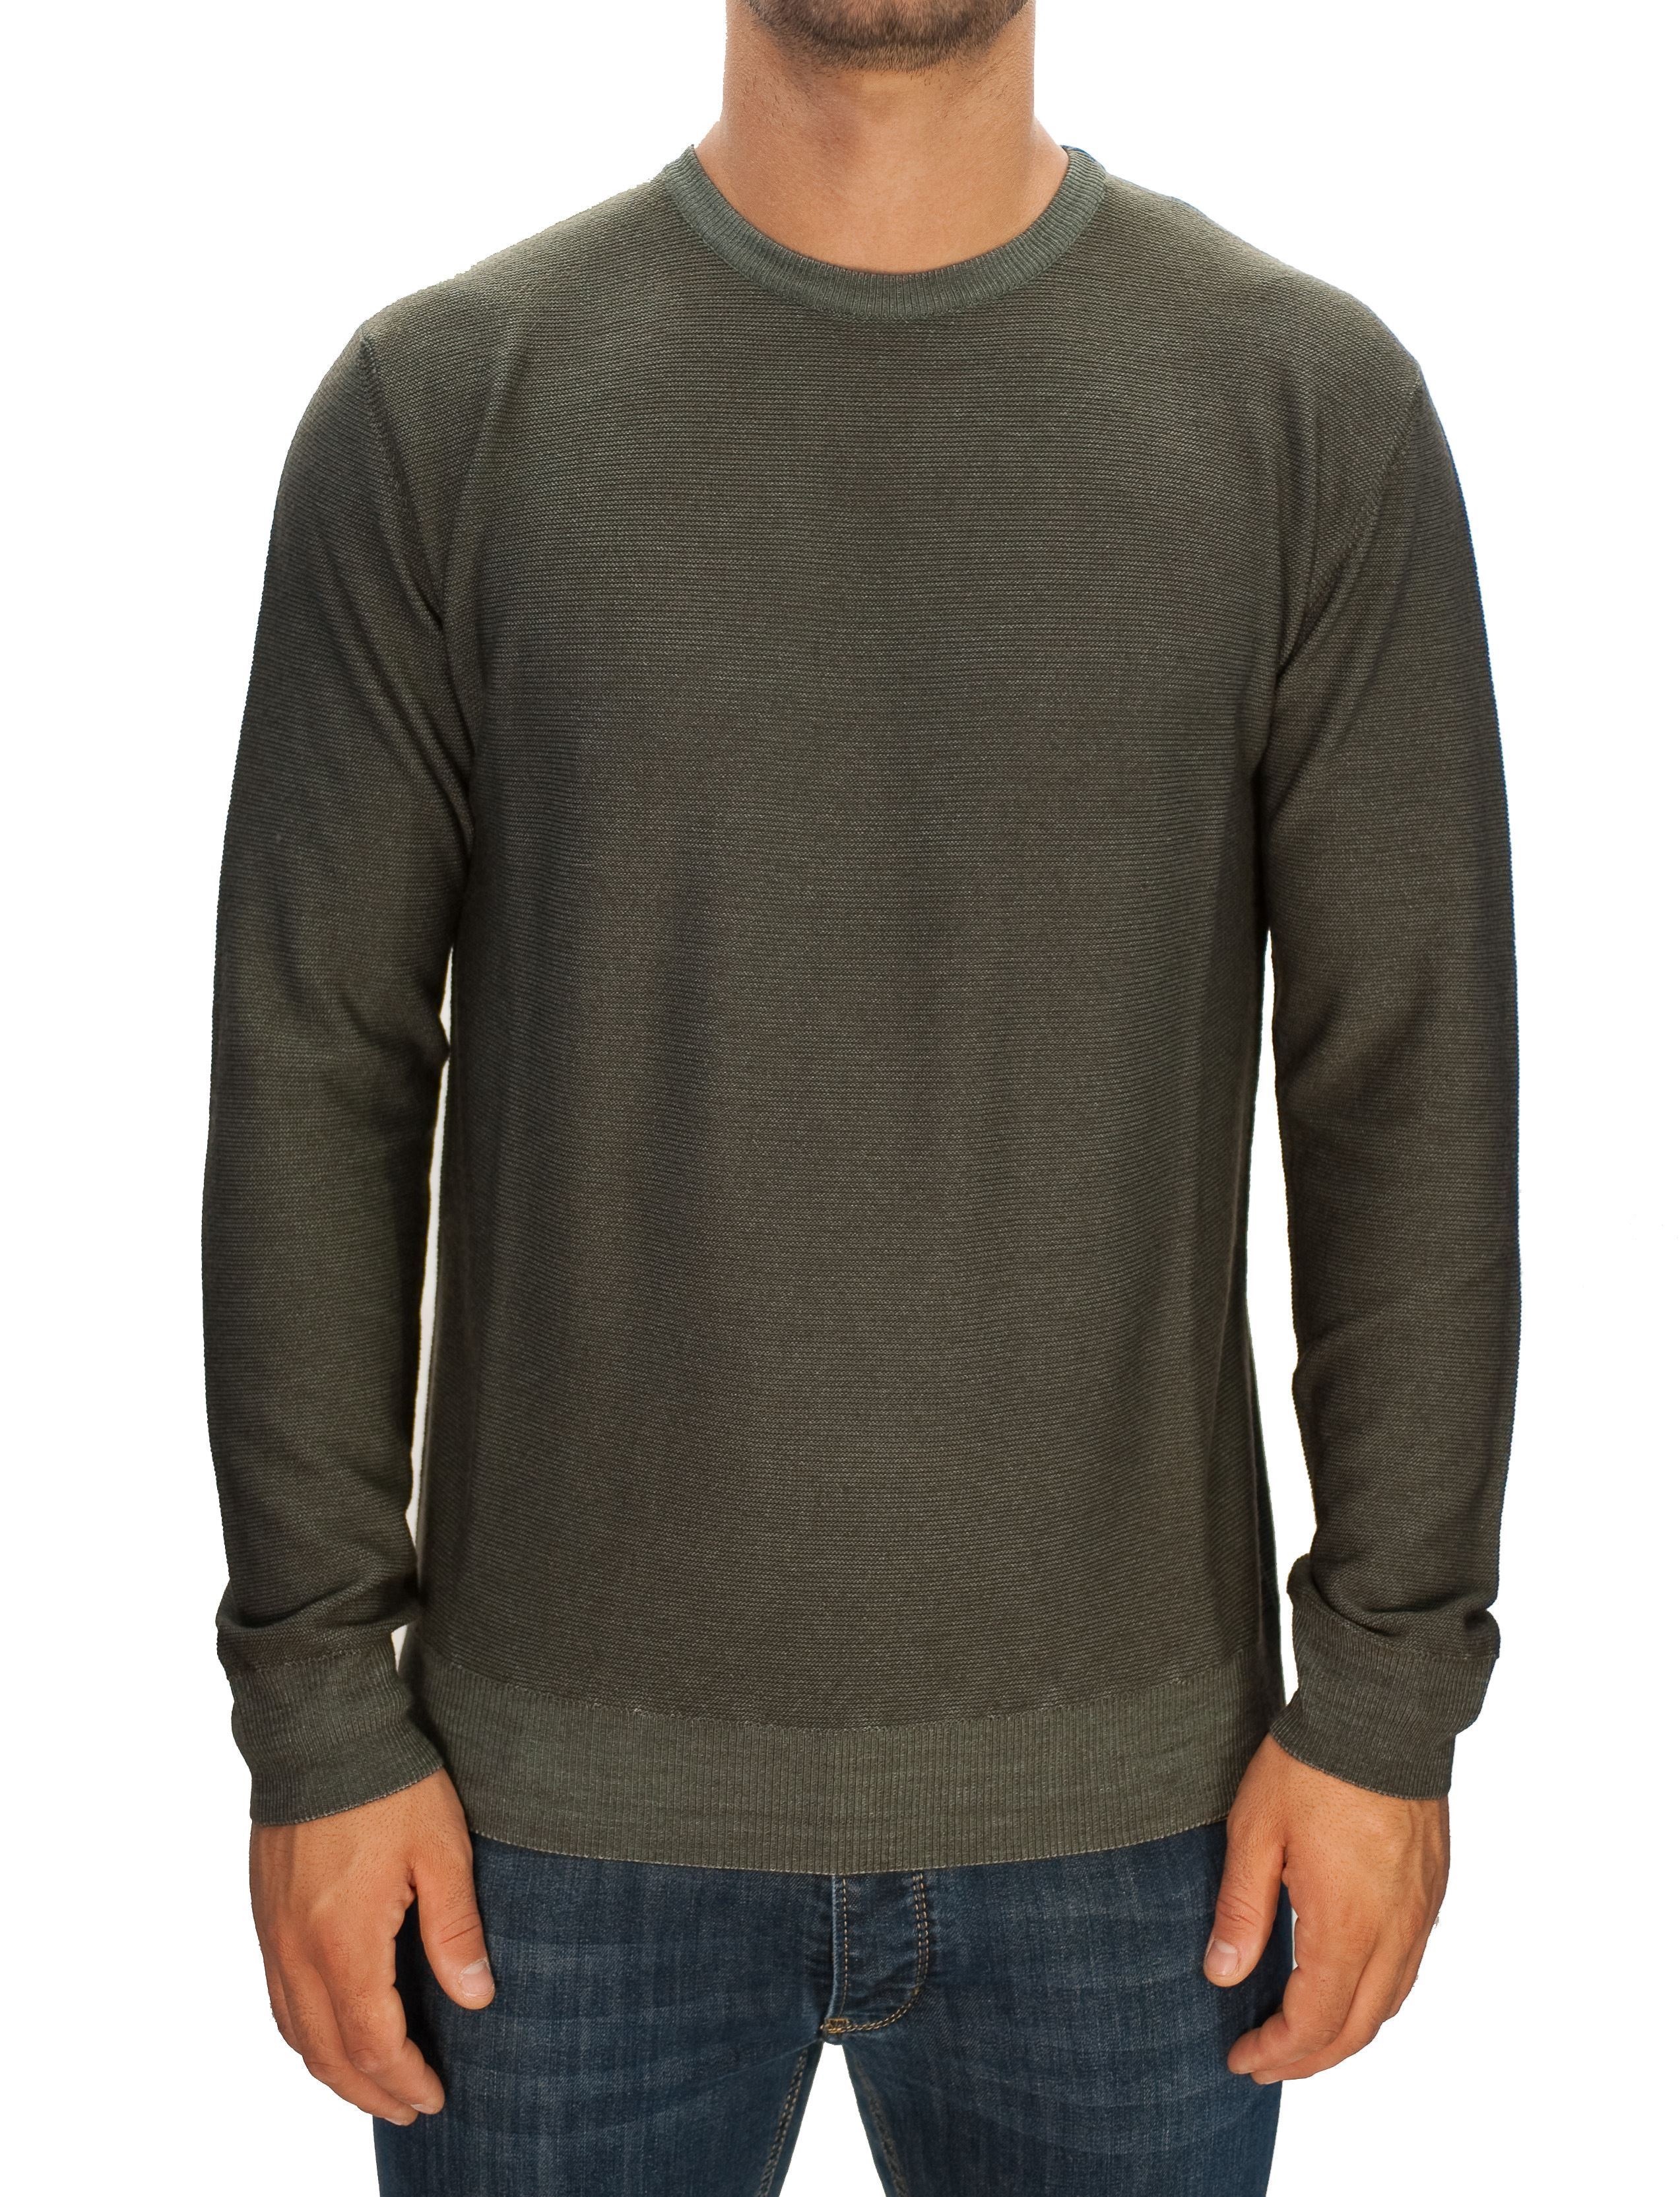 Picture of Delavé green-colored wool crewneck